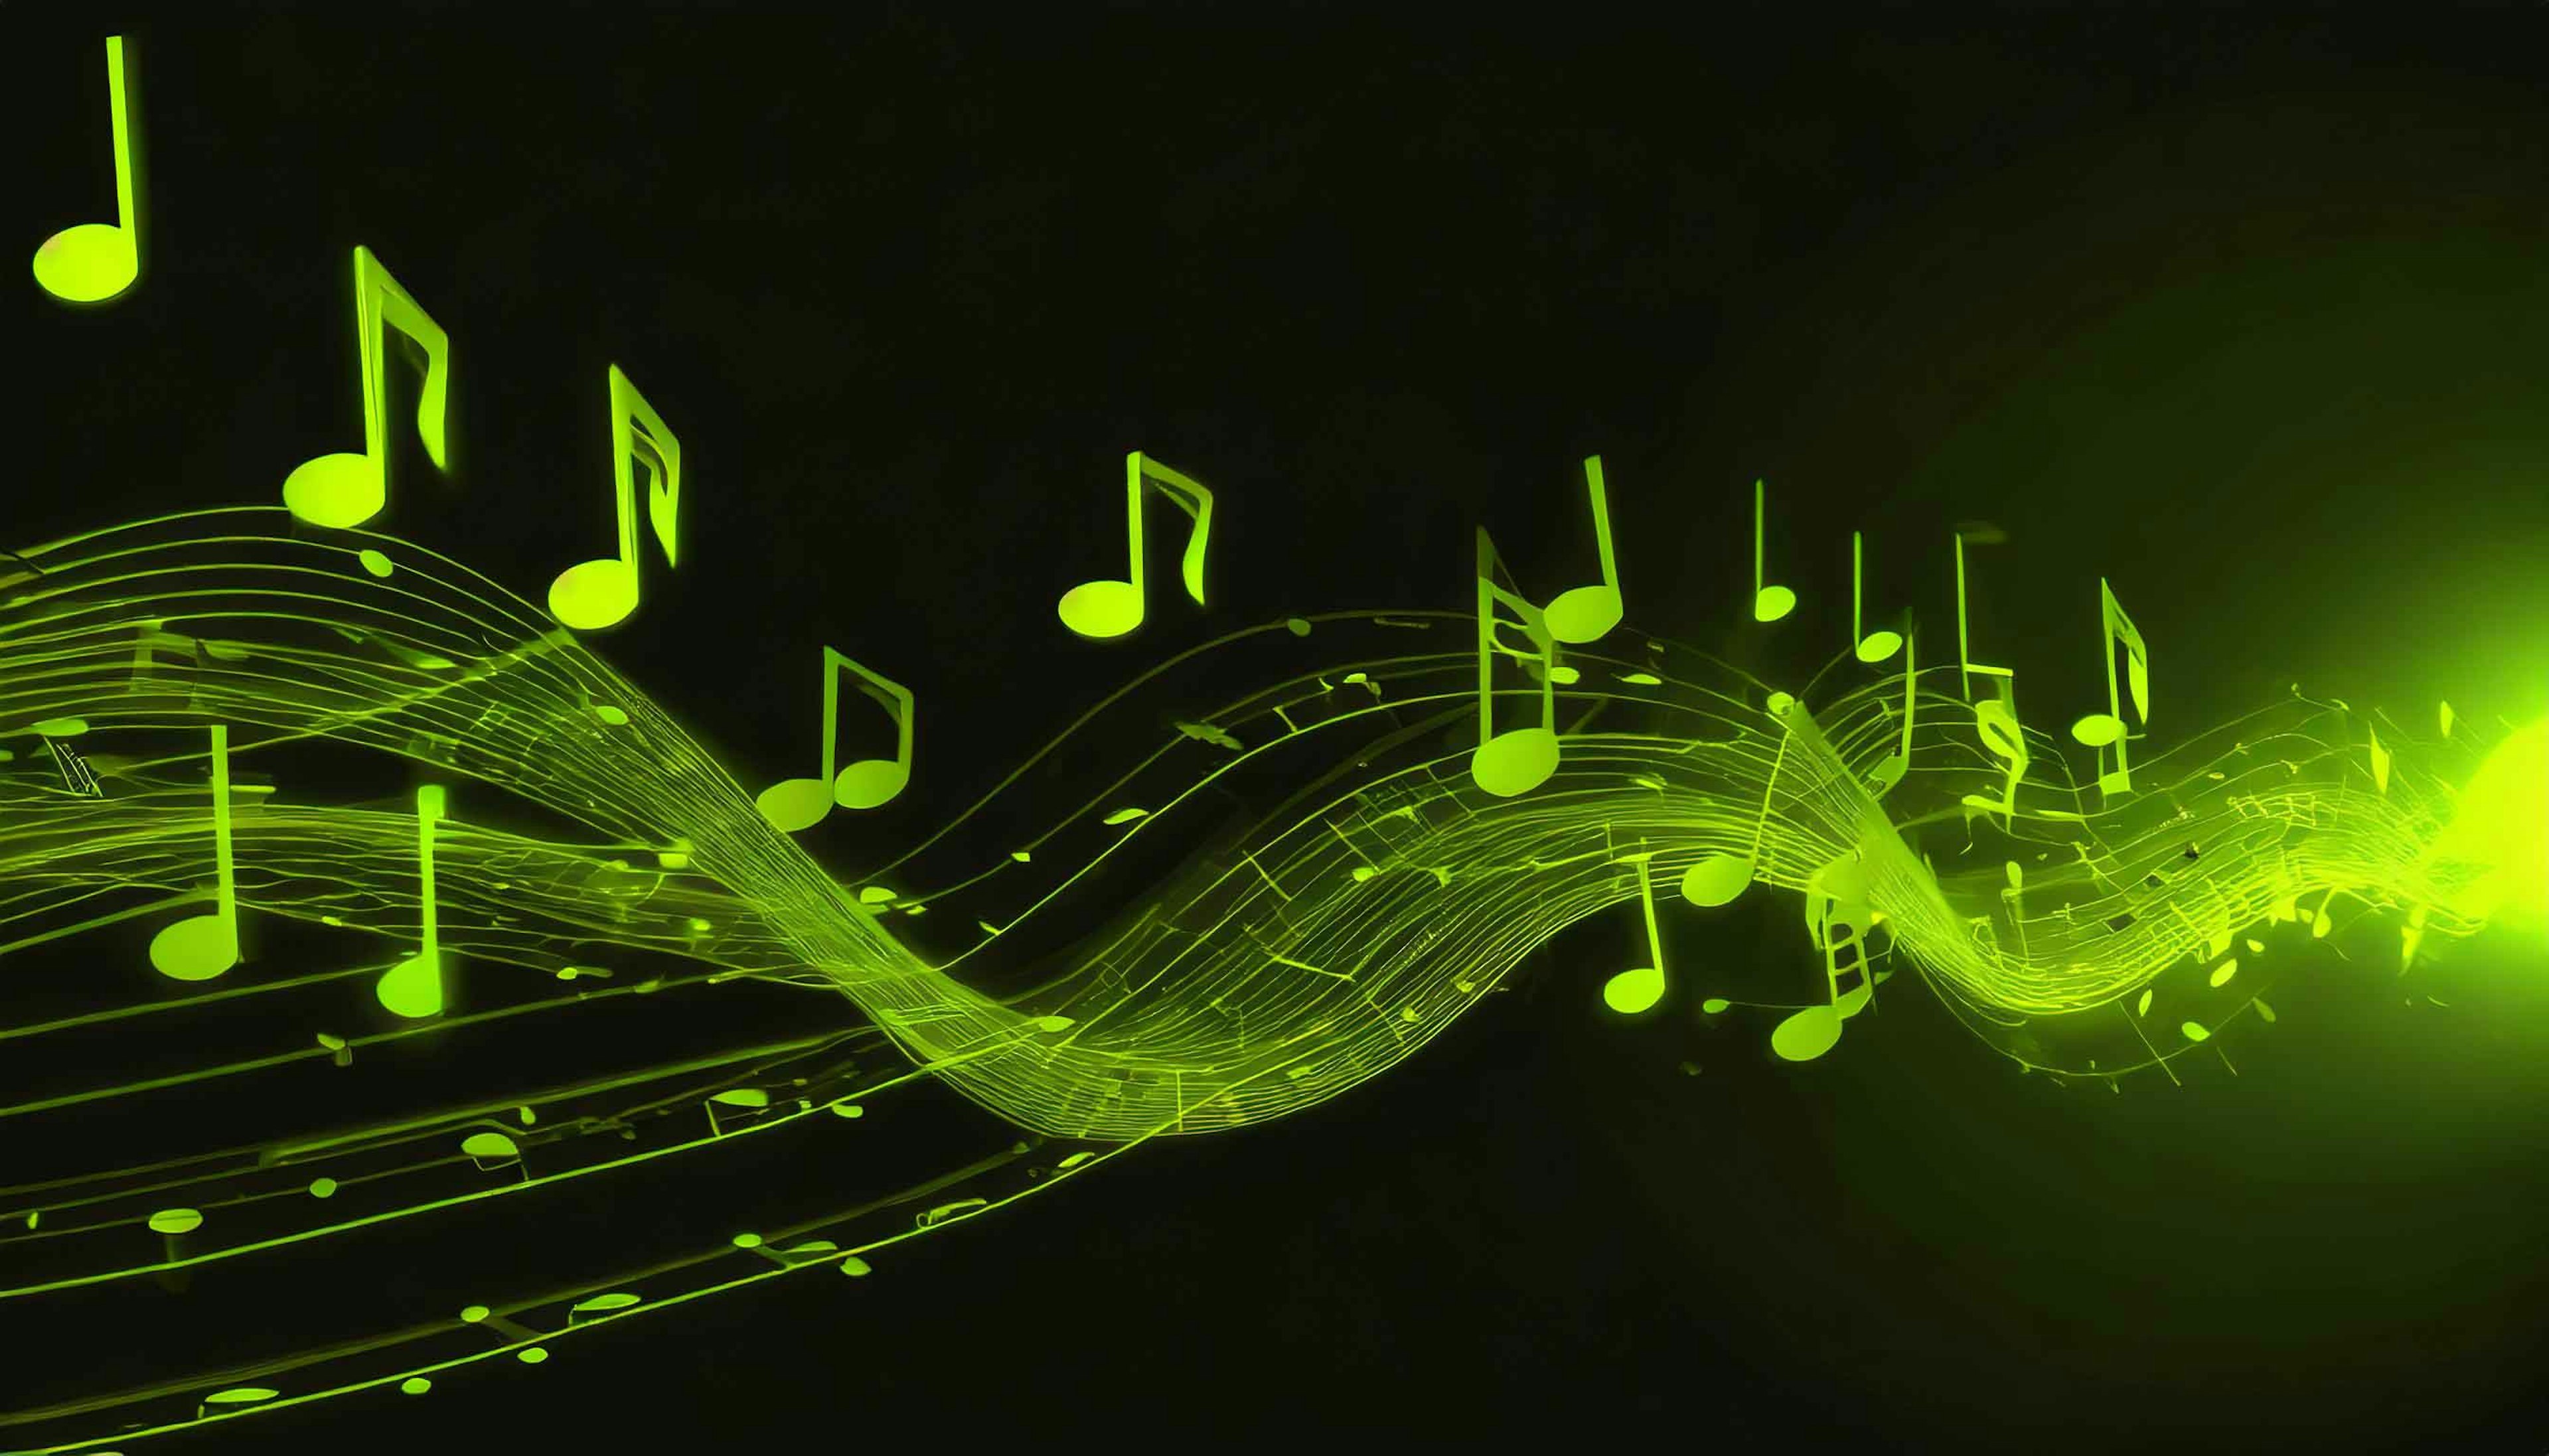 Music notes floating on a dark background.